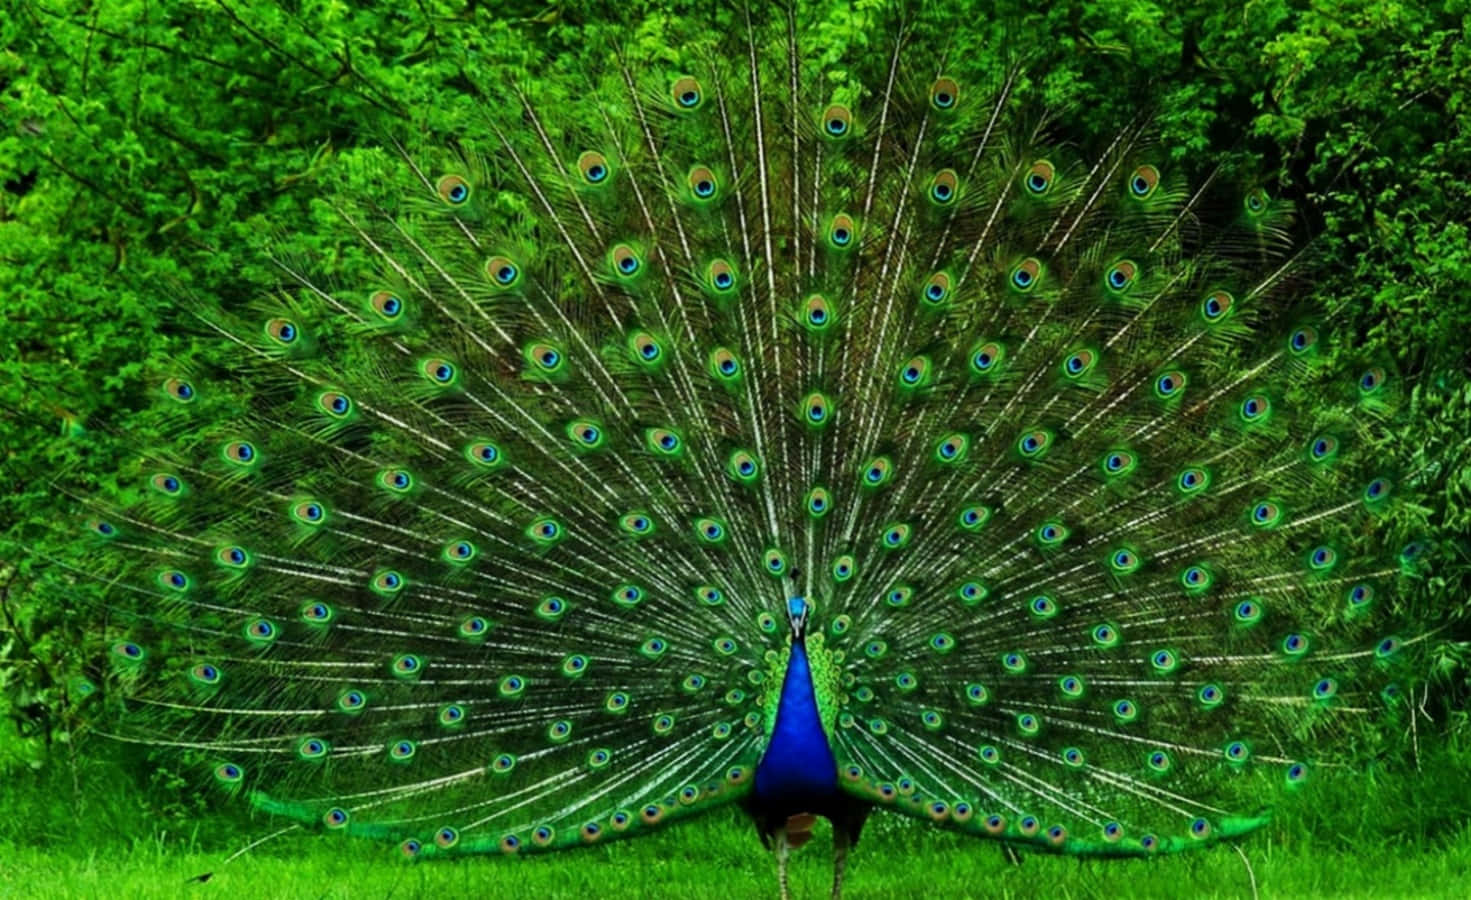 A proud peacock spreads its stunning feathers